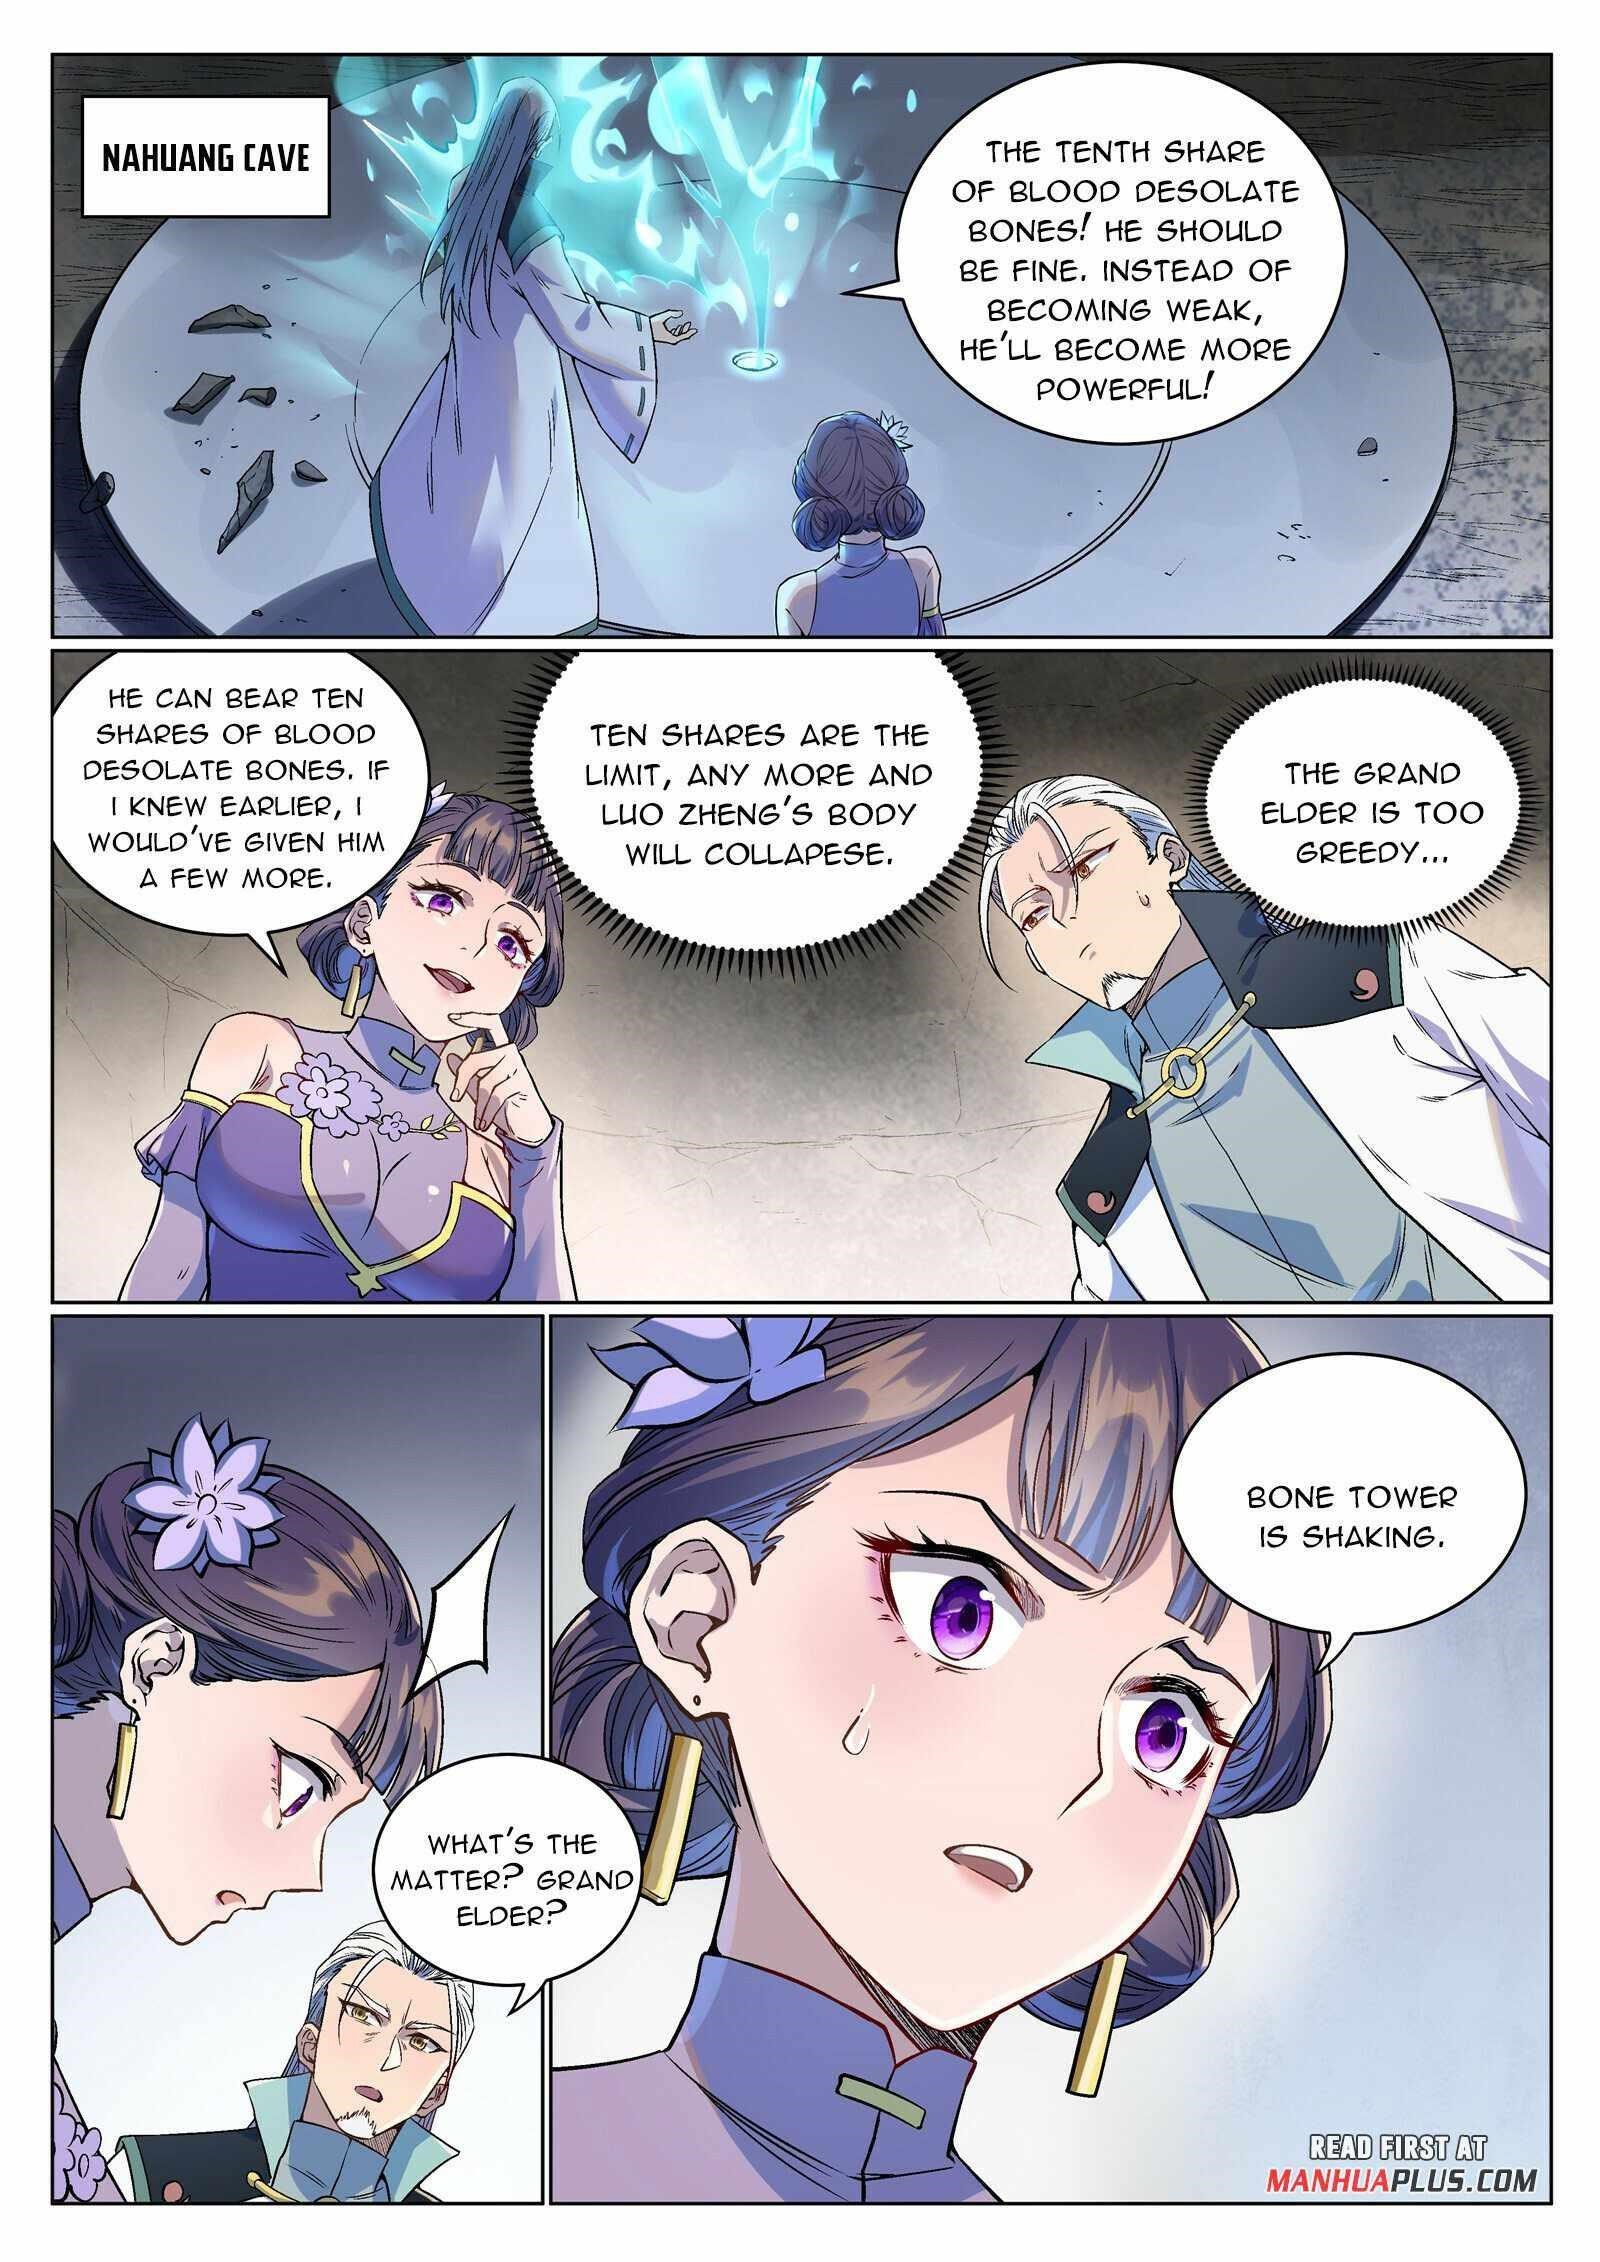 APOTHEOSIS Chapter 997 - Page 2